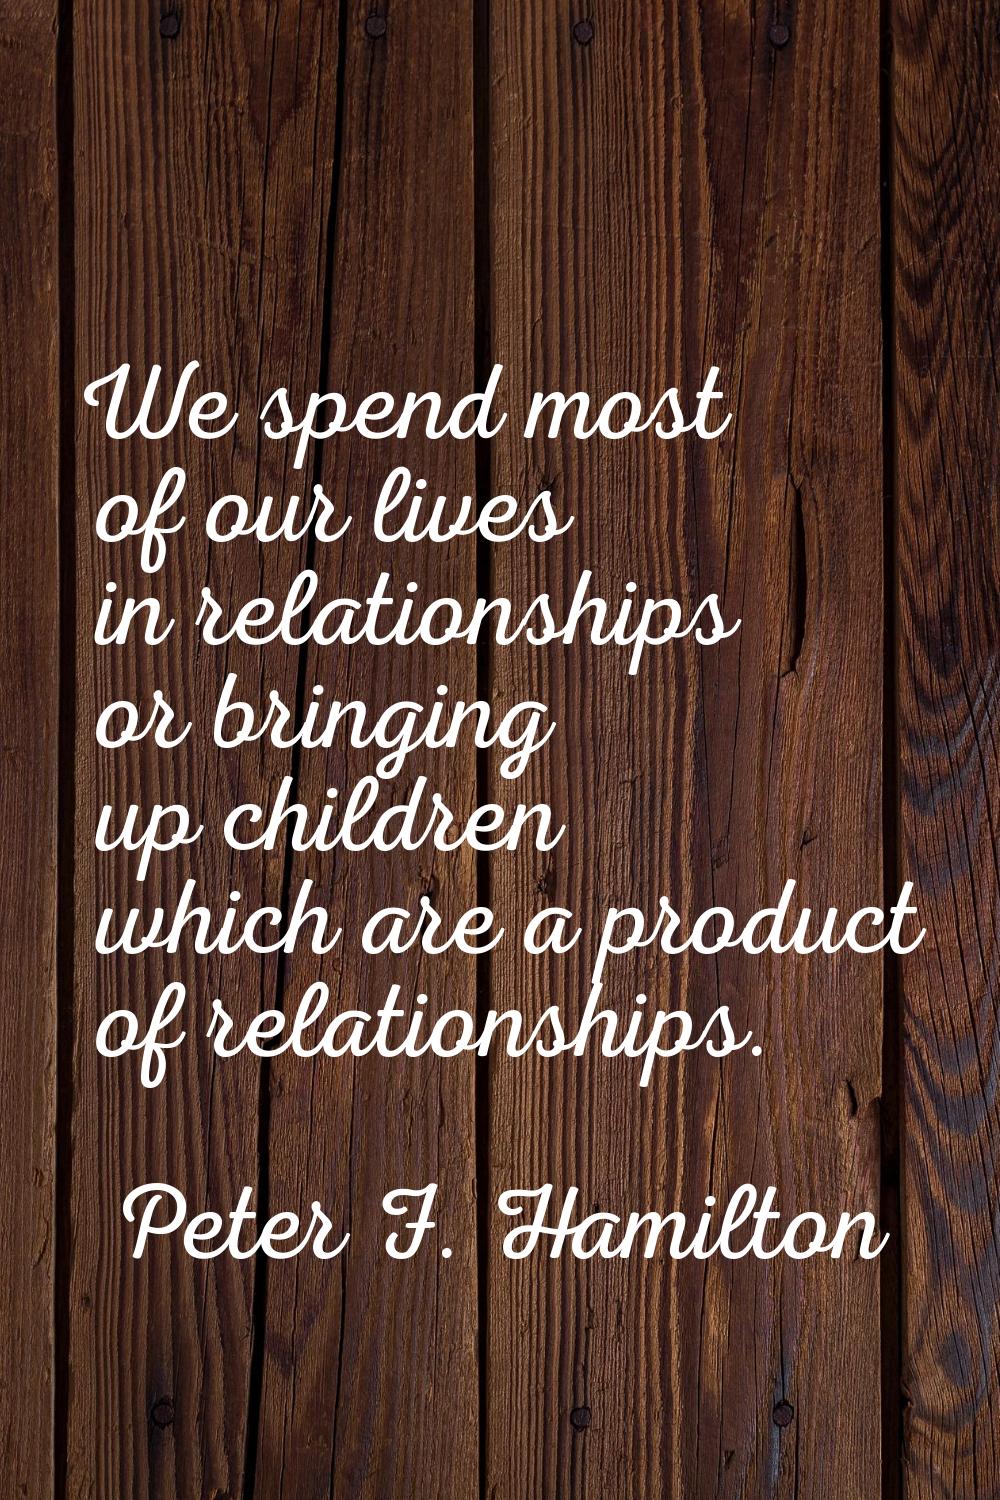 We spend most of our lives in relationships or bringing up children which are a product of relation